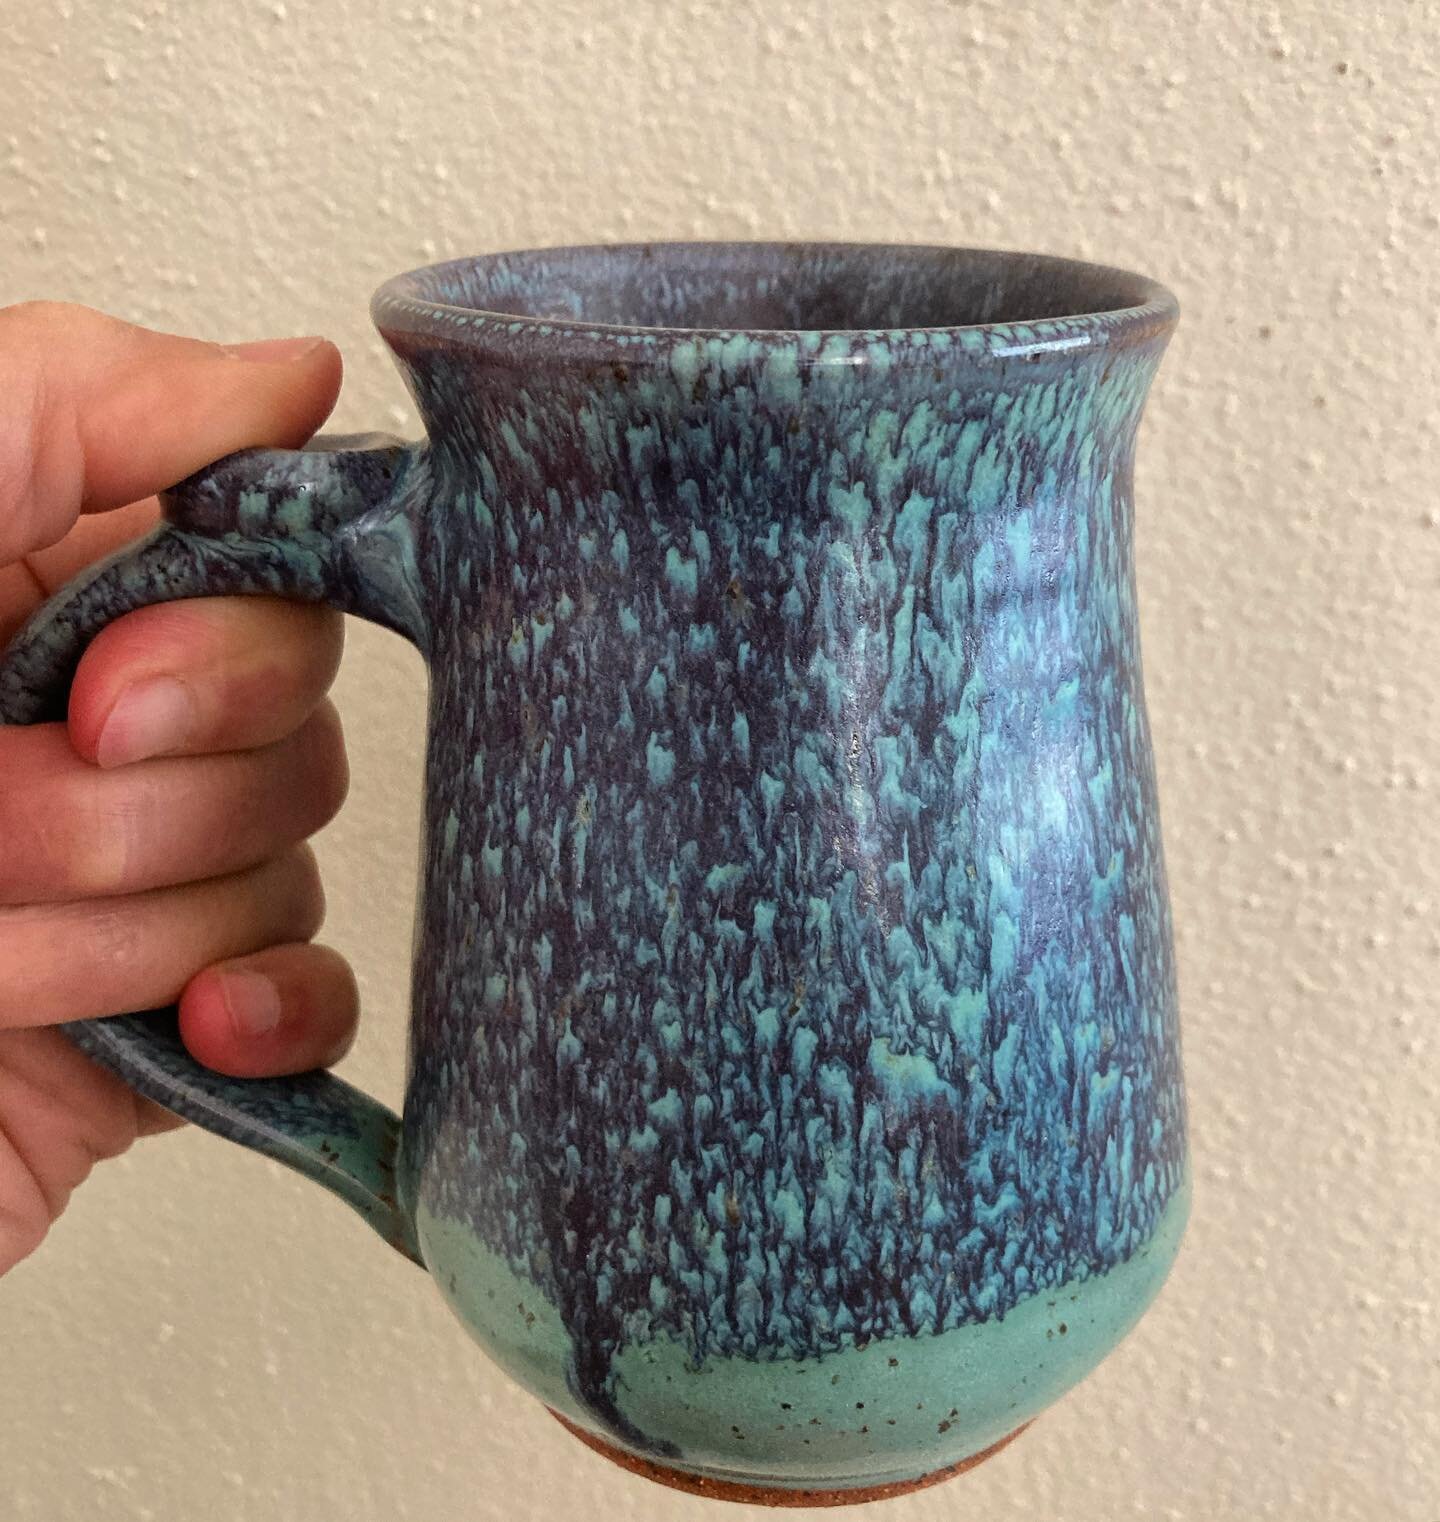 Such a fun new glaze combination of turquoise and purple! Check out my story for more pieces in this combination!
#Mahpottery #chattanooga #nooga #ceramics #pottery #womensupportingwomen #localbusiness #design #turquoise #mugs #coffee #purple